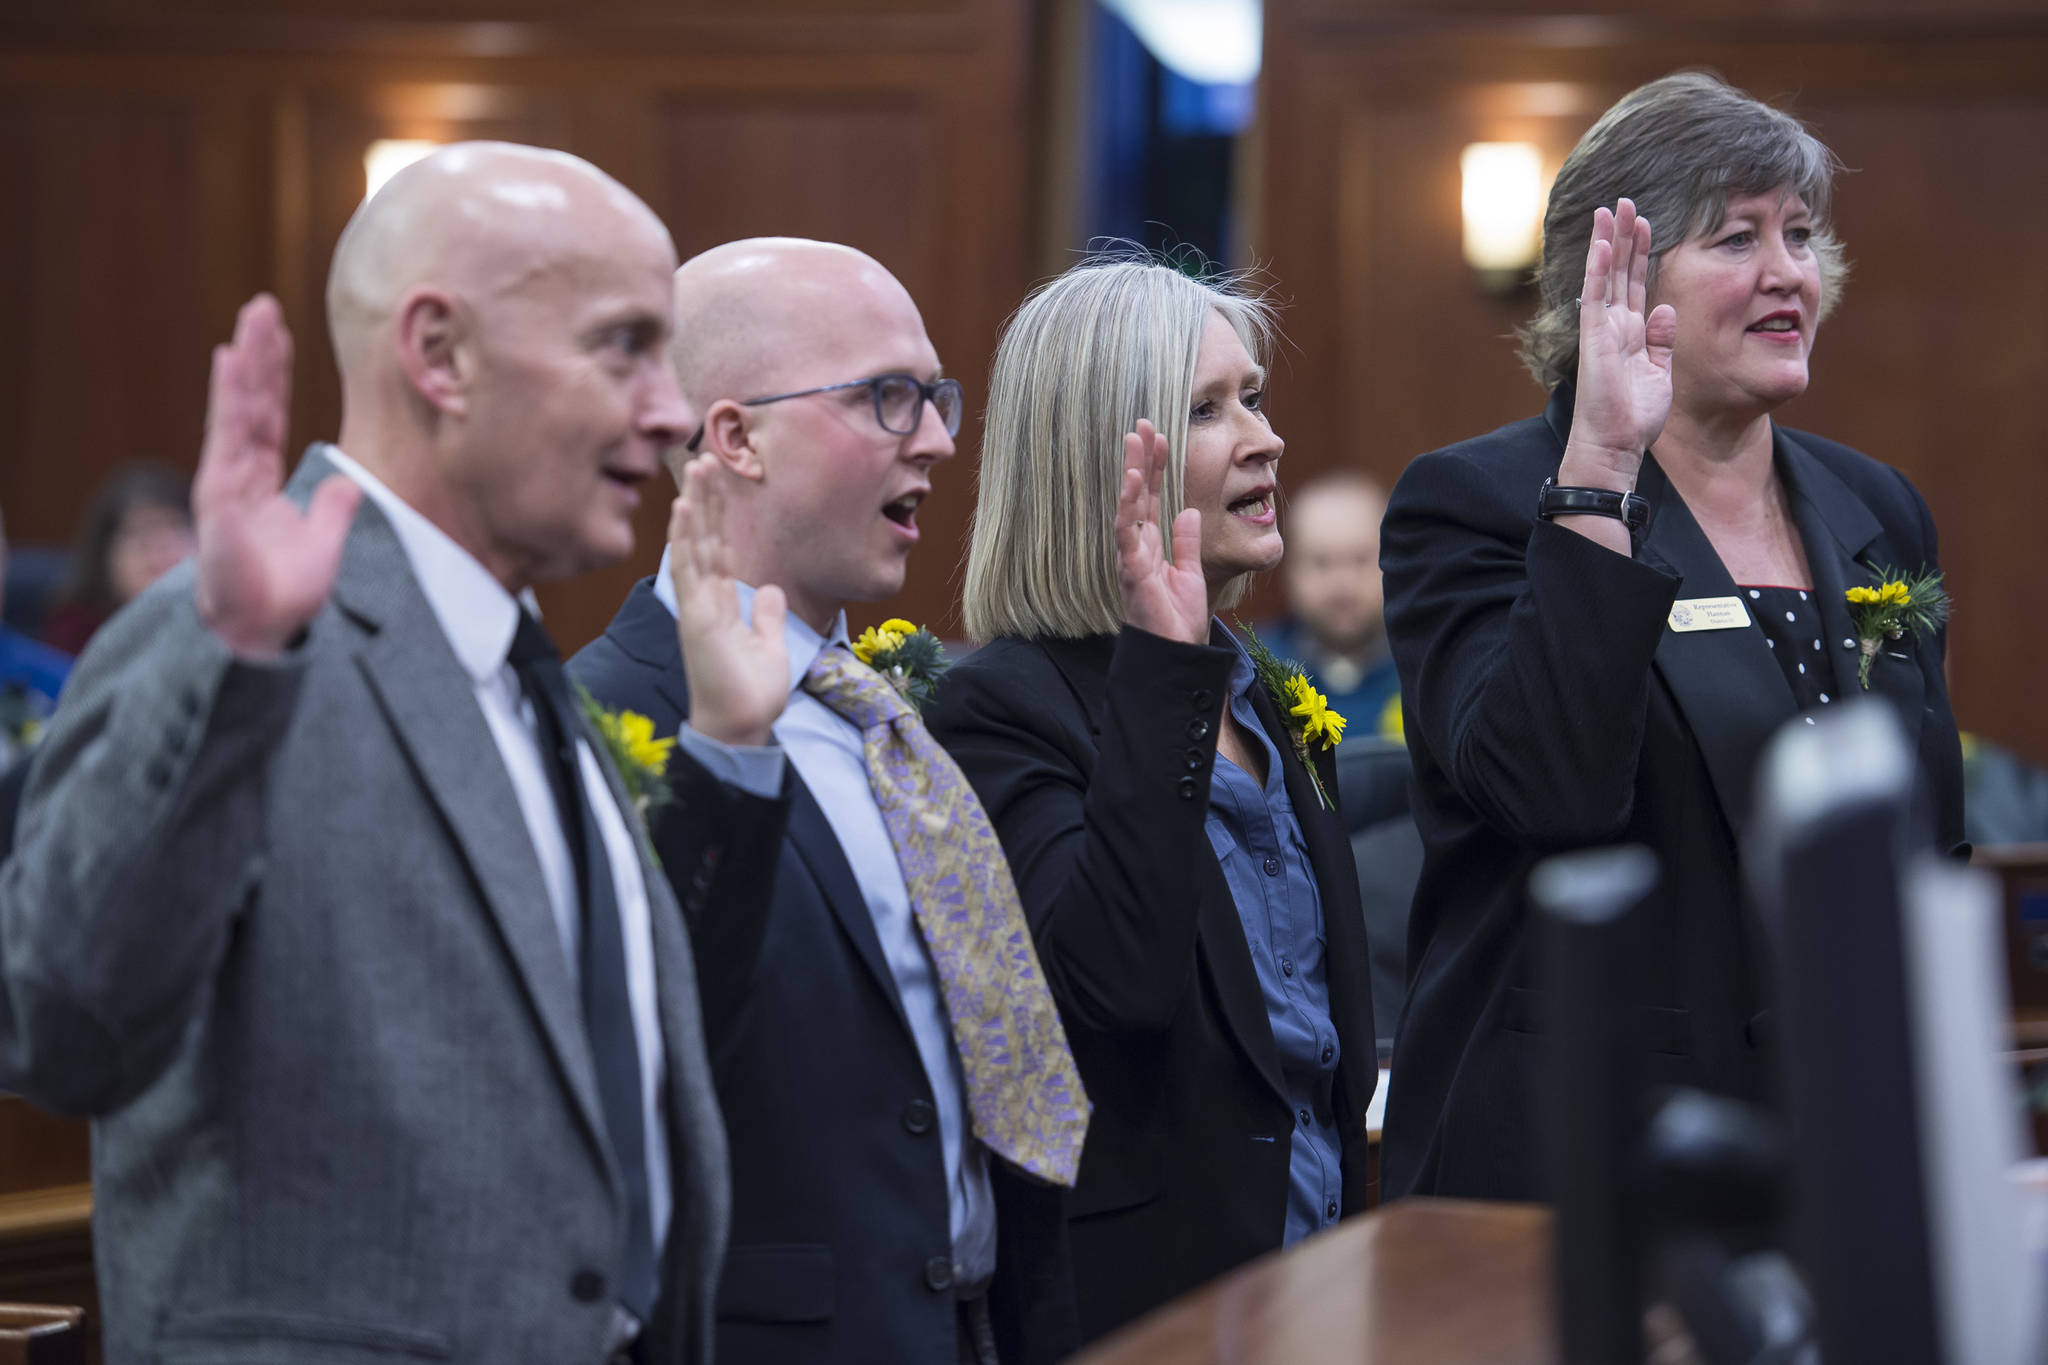 Rep. Dan Ortiz, I-Ketchikan, left, Rep. Jonathan Kreiss-Tomkins, D-Sitka, Rep. Andi Story, D-Juneau, and Rep. Sara Hannan, D-Juneau, take the oath of office on the opening day of the 31st Session of the Alaska Legislature on Tuesday, Jan. 15, 2019. (Michael Penn | Juneau Empire)